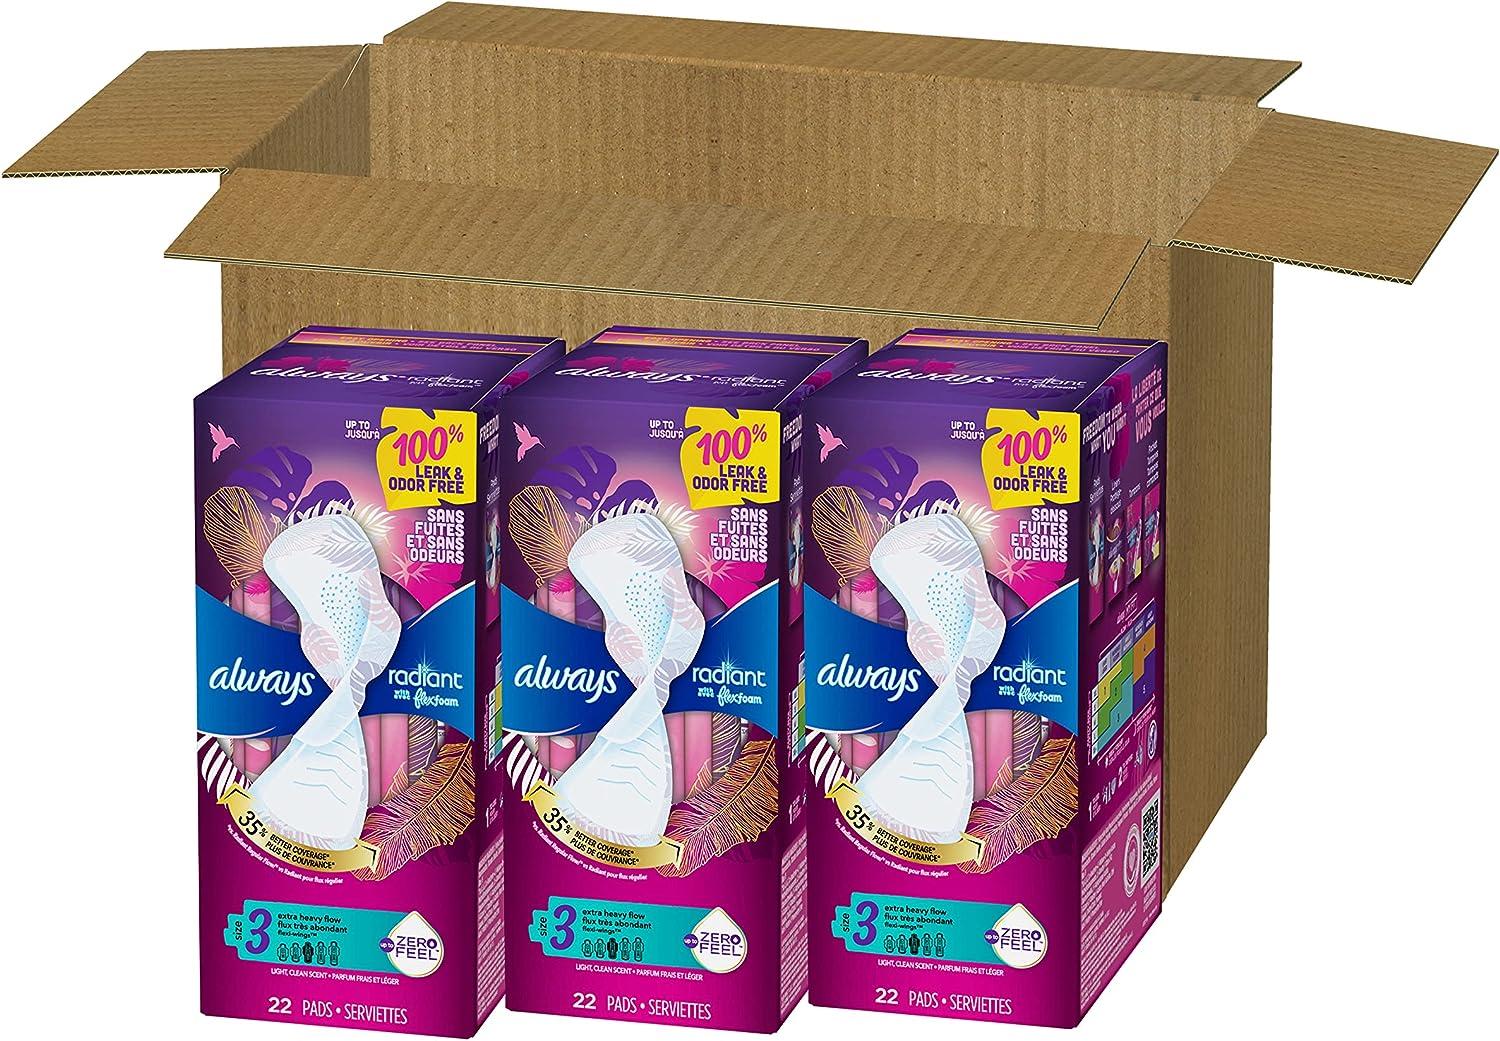 Always Radiant FlexFoam Pads for Women Size 1, Regular Absorbency, 100%  Leak & Odor Free Protection is possible, with Wings, Scented, 30 count